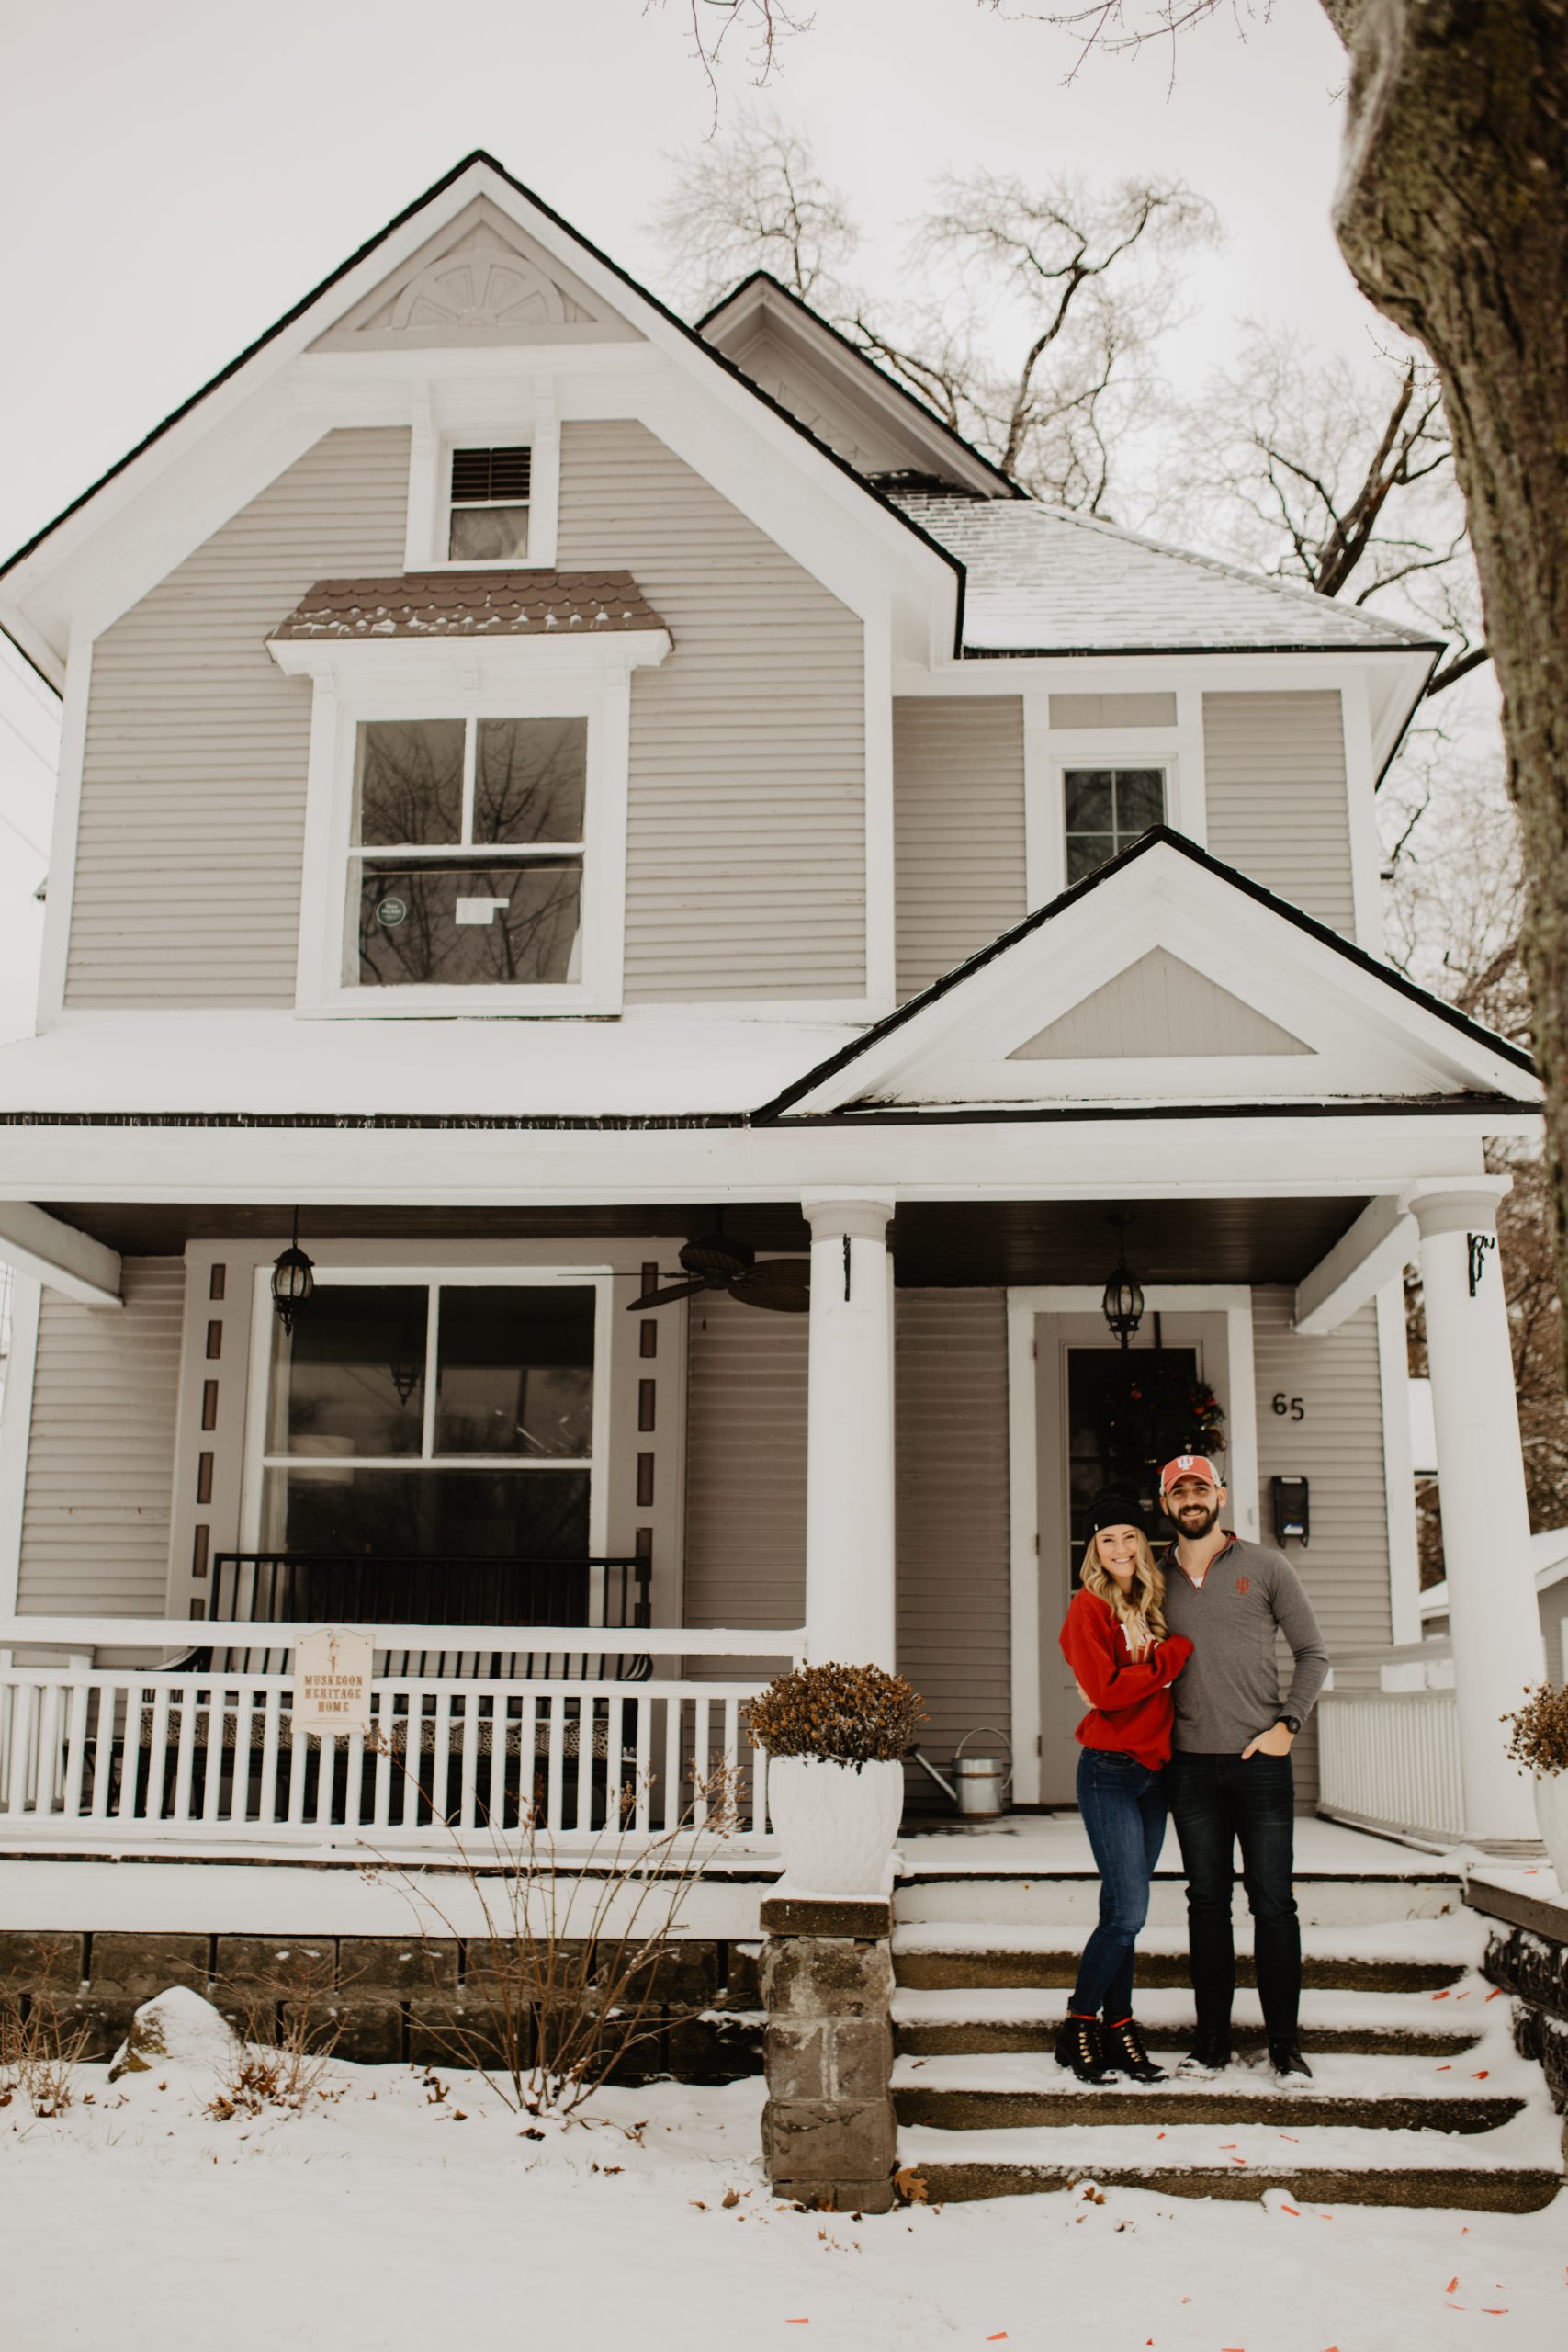 Buying a House: 3 Up-front Costs I Almost Forgot About | Miranda Schroeder Blog

www.mirandaschroeder.com